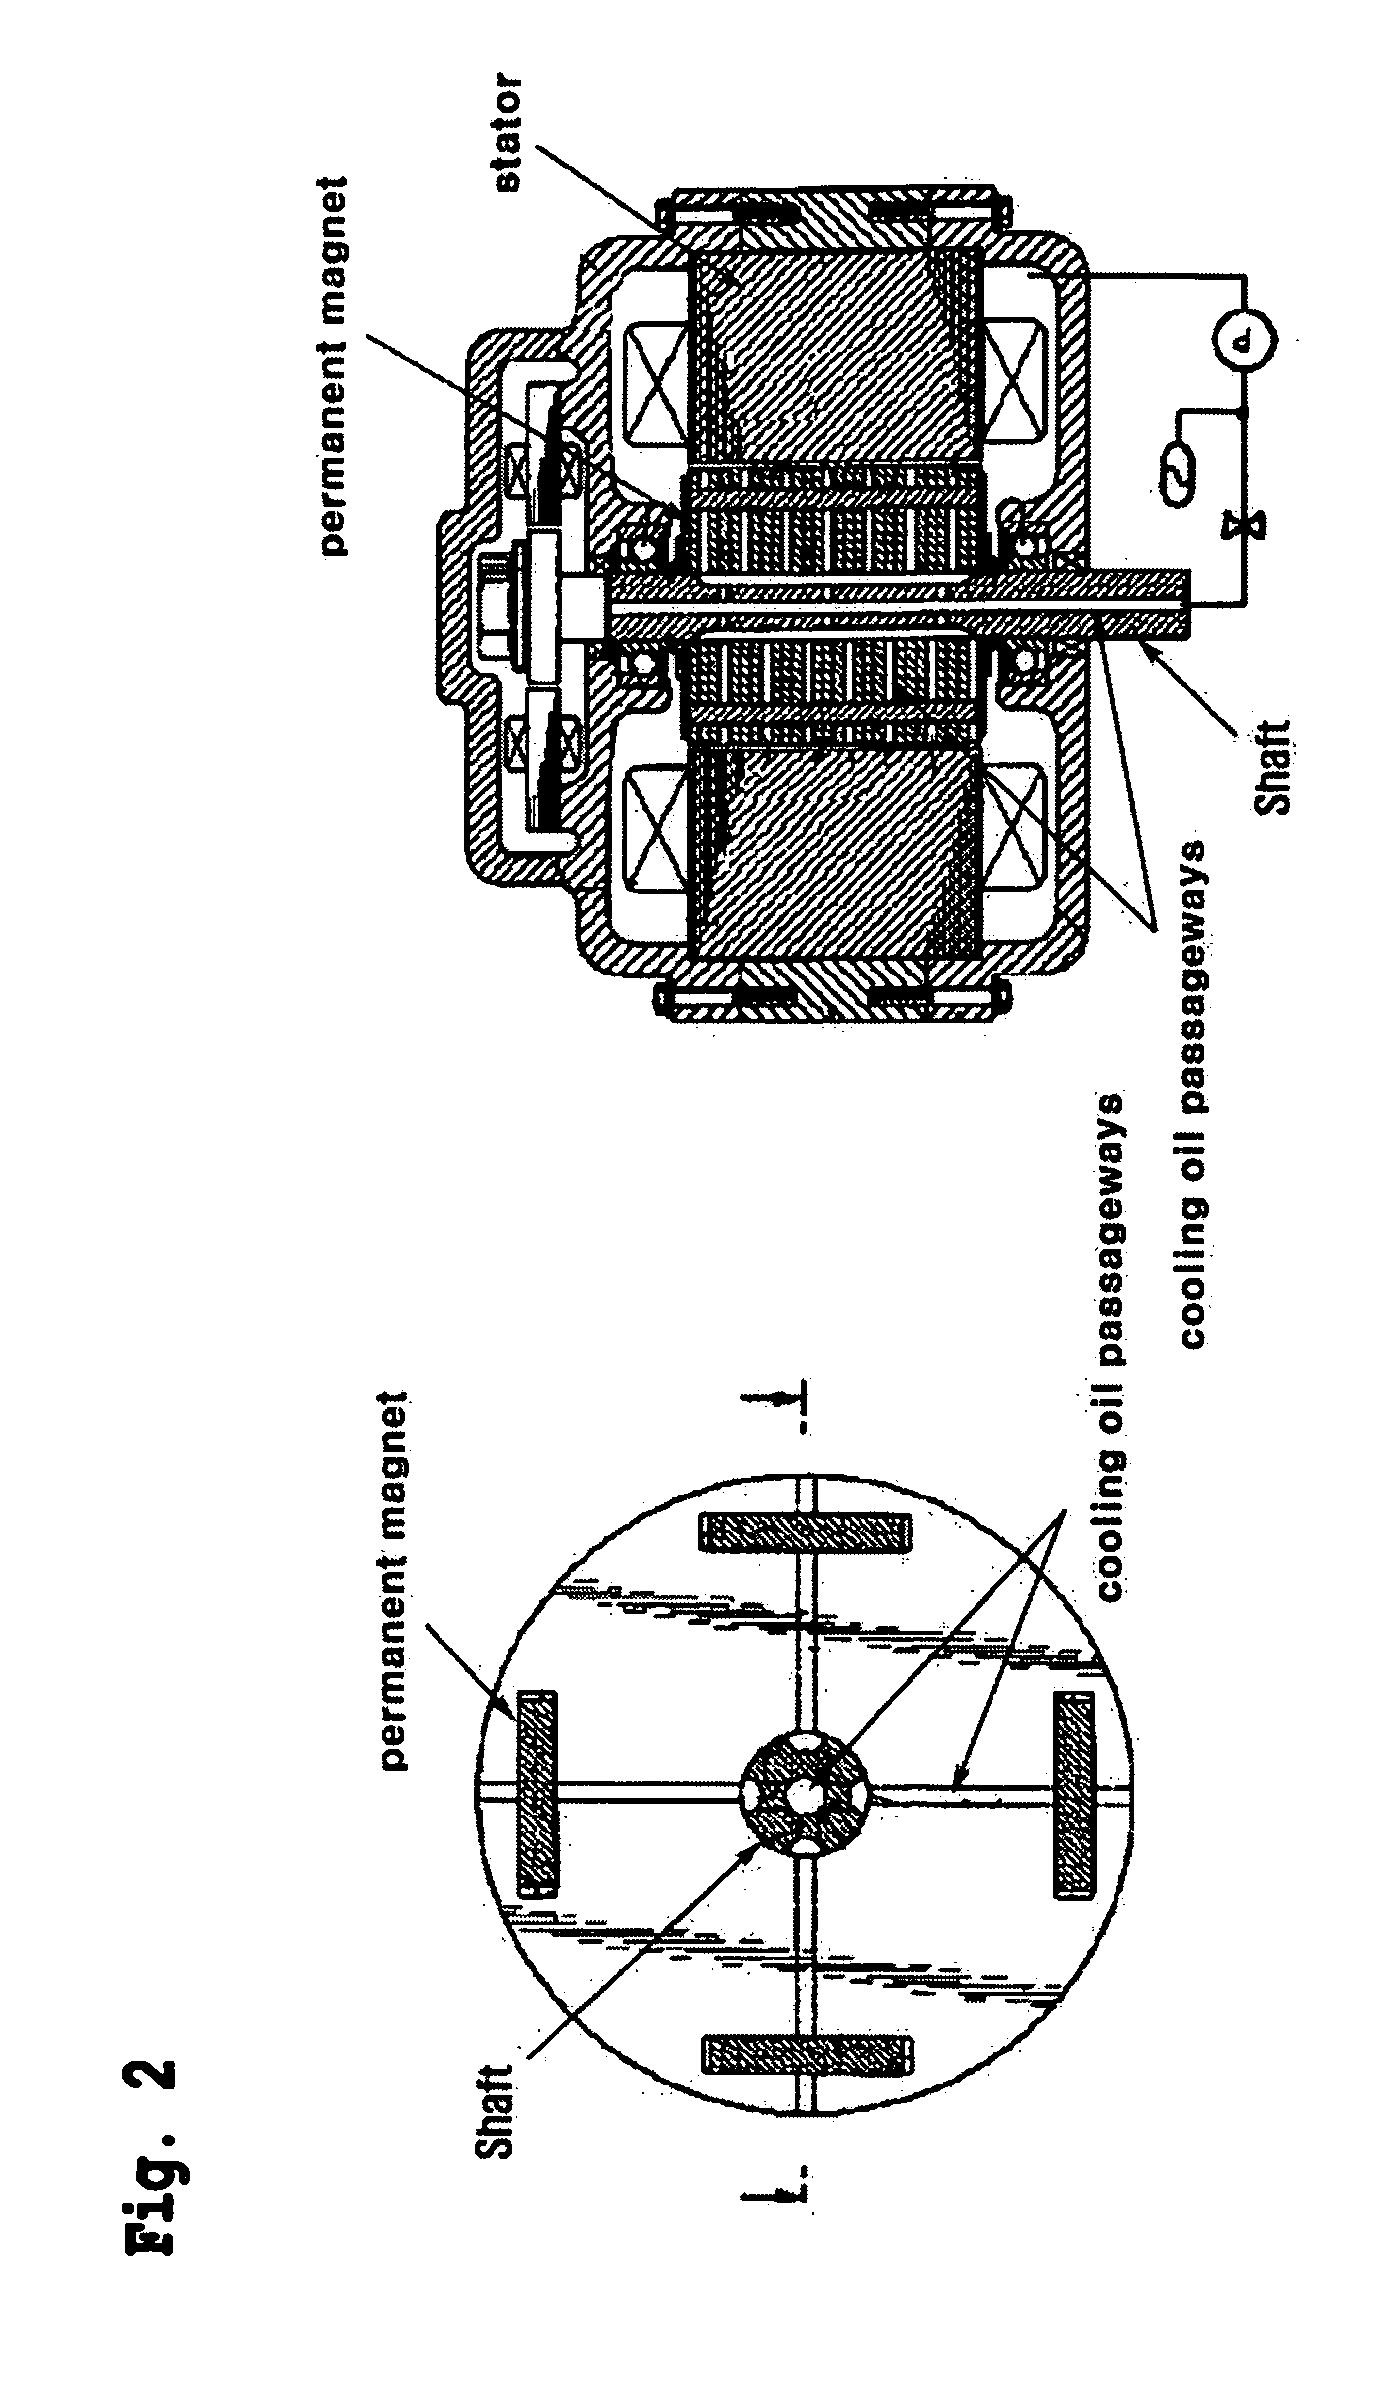 Device and method for cooling motor for hybrid electric vehicles